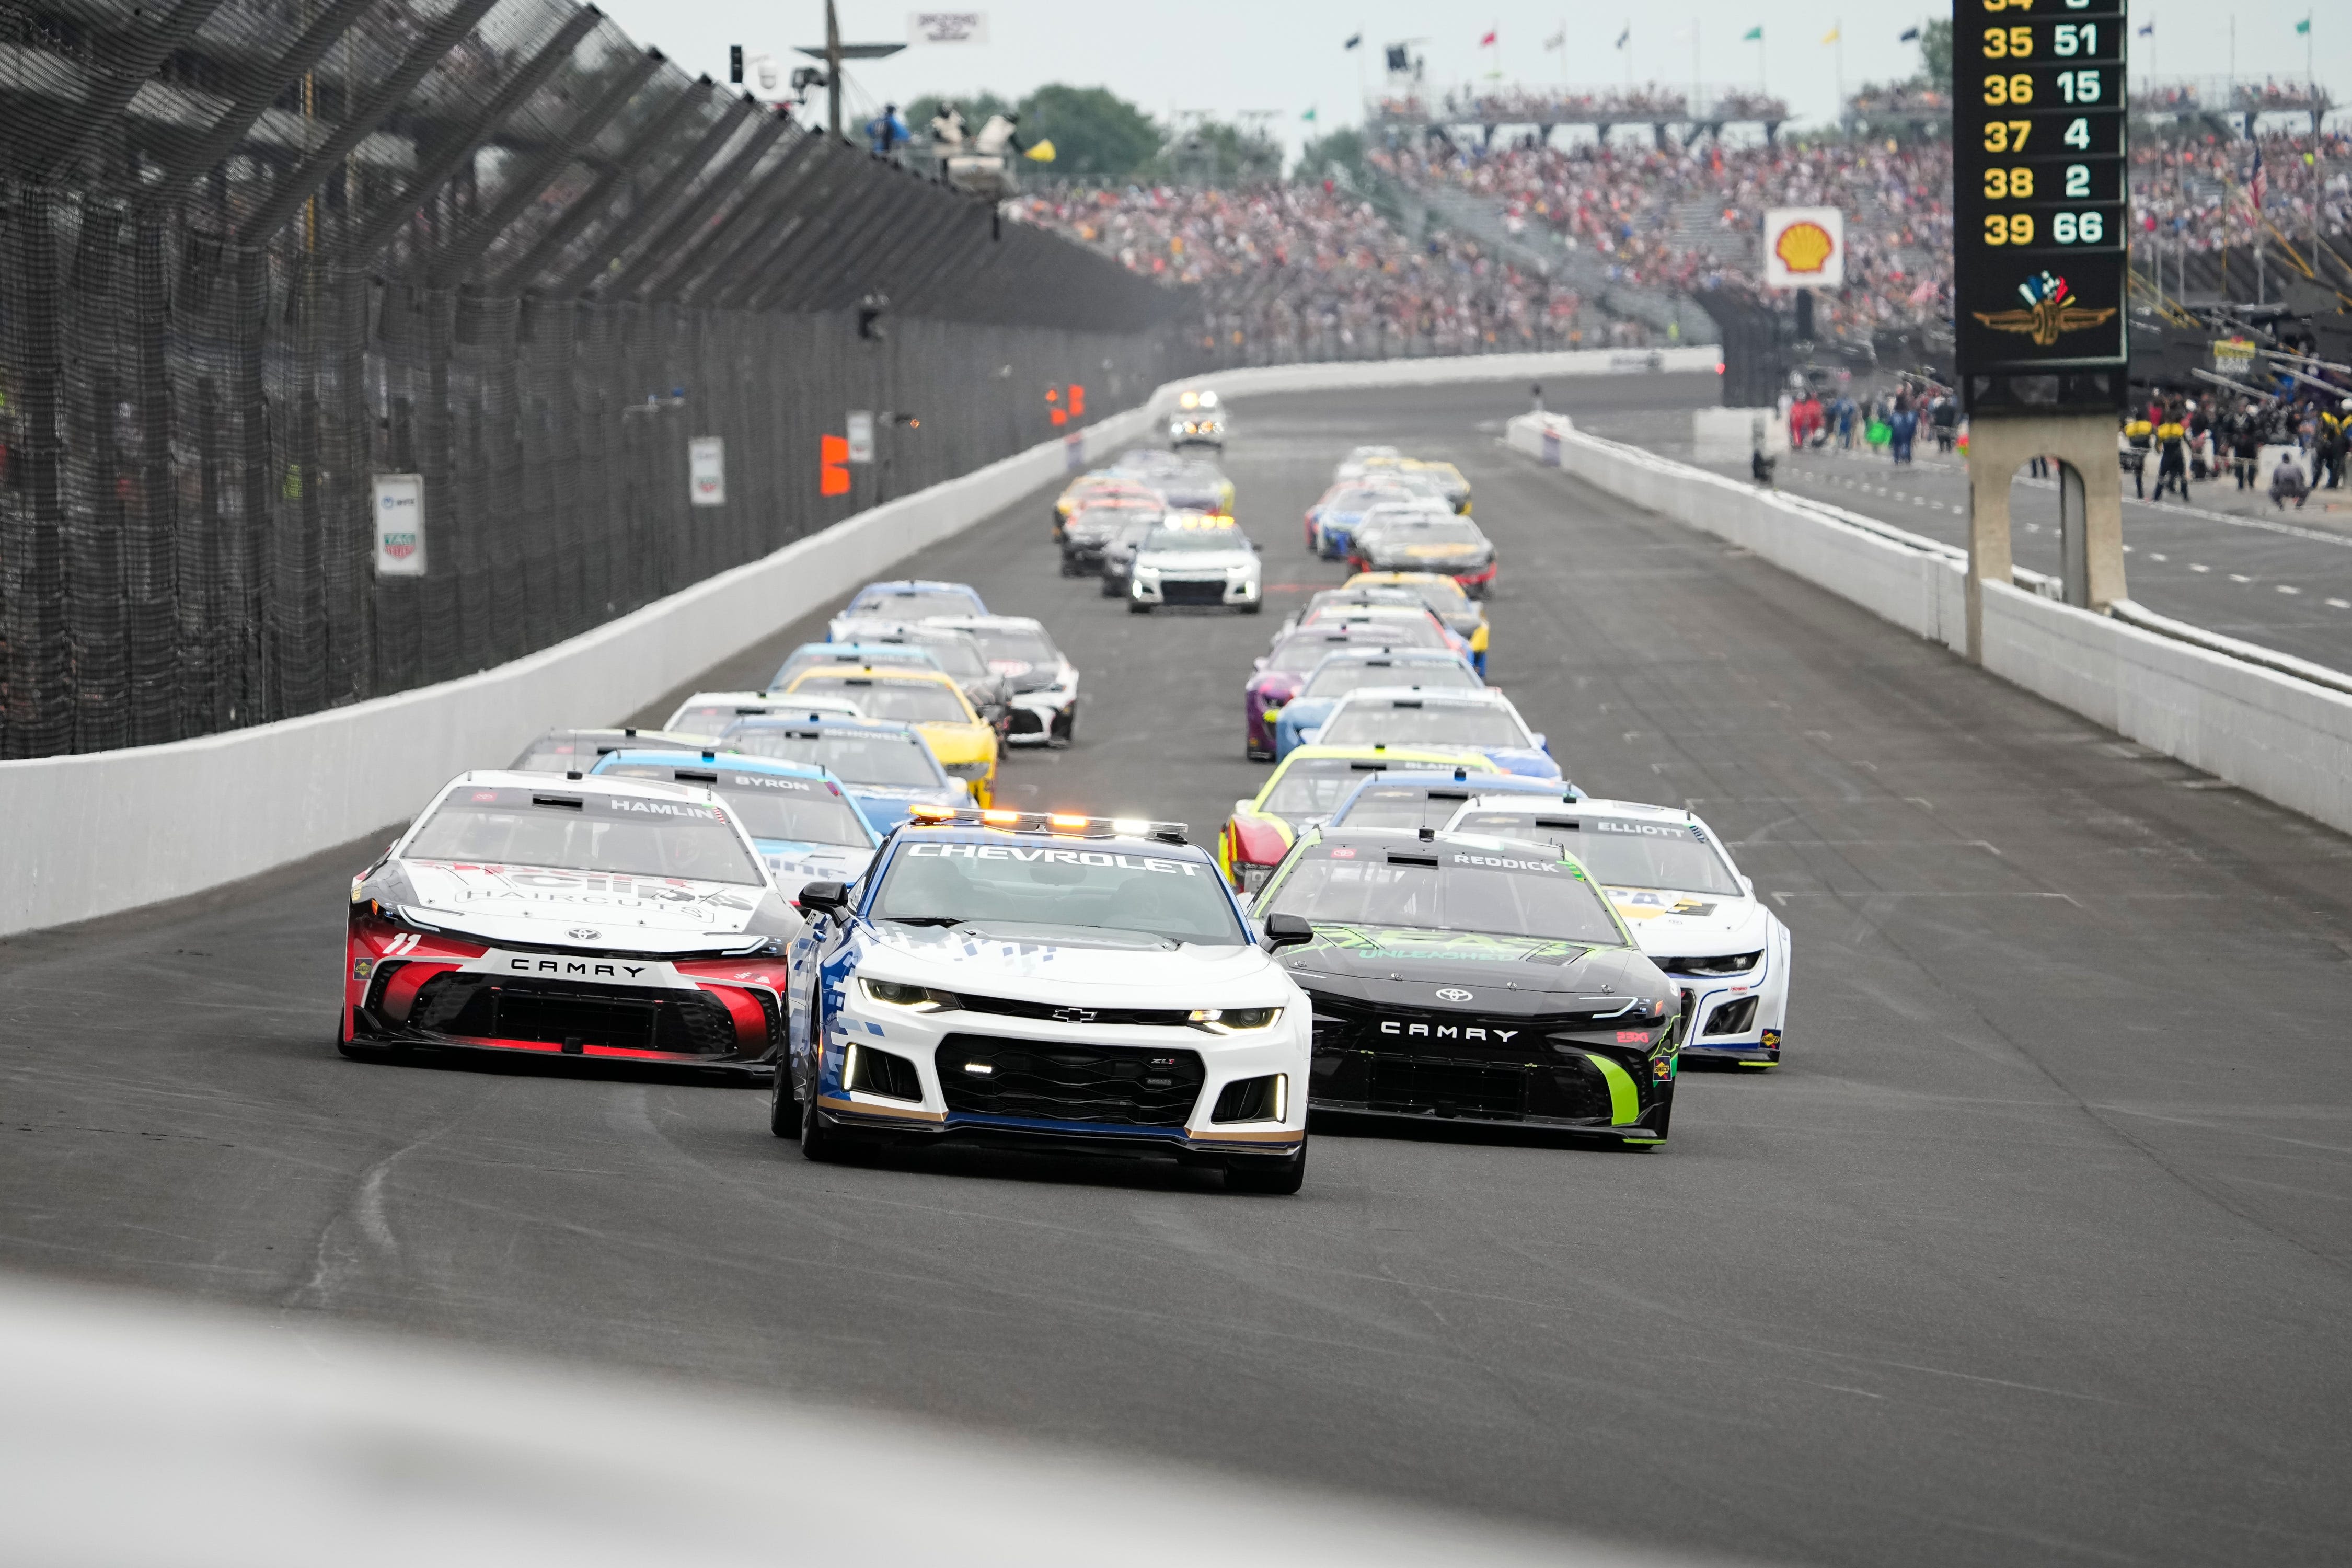 NASCAR Cup Series race at Indianapolis: Live updates, highlights, live leaderboard of Brickyard 400